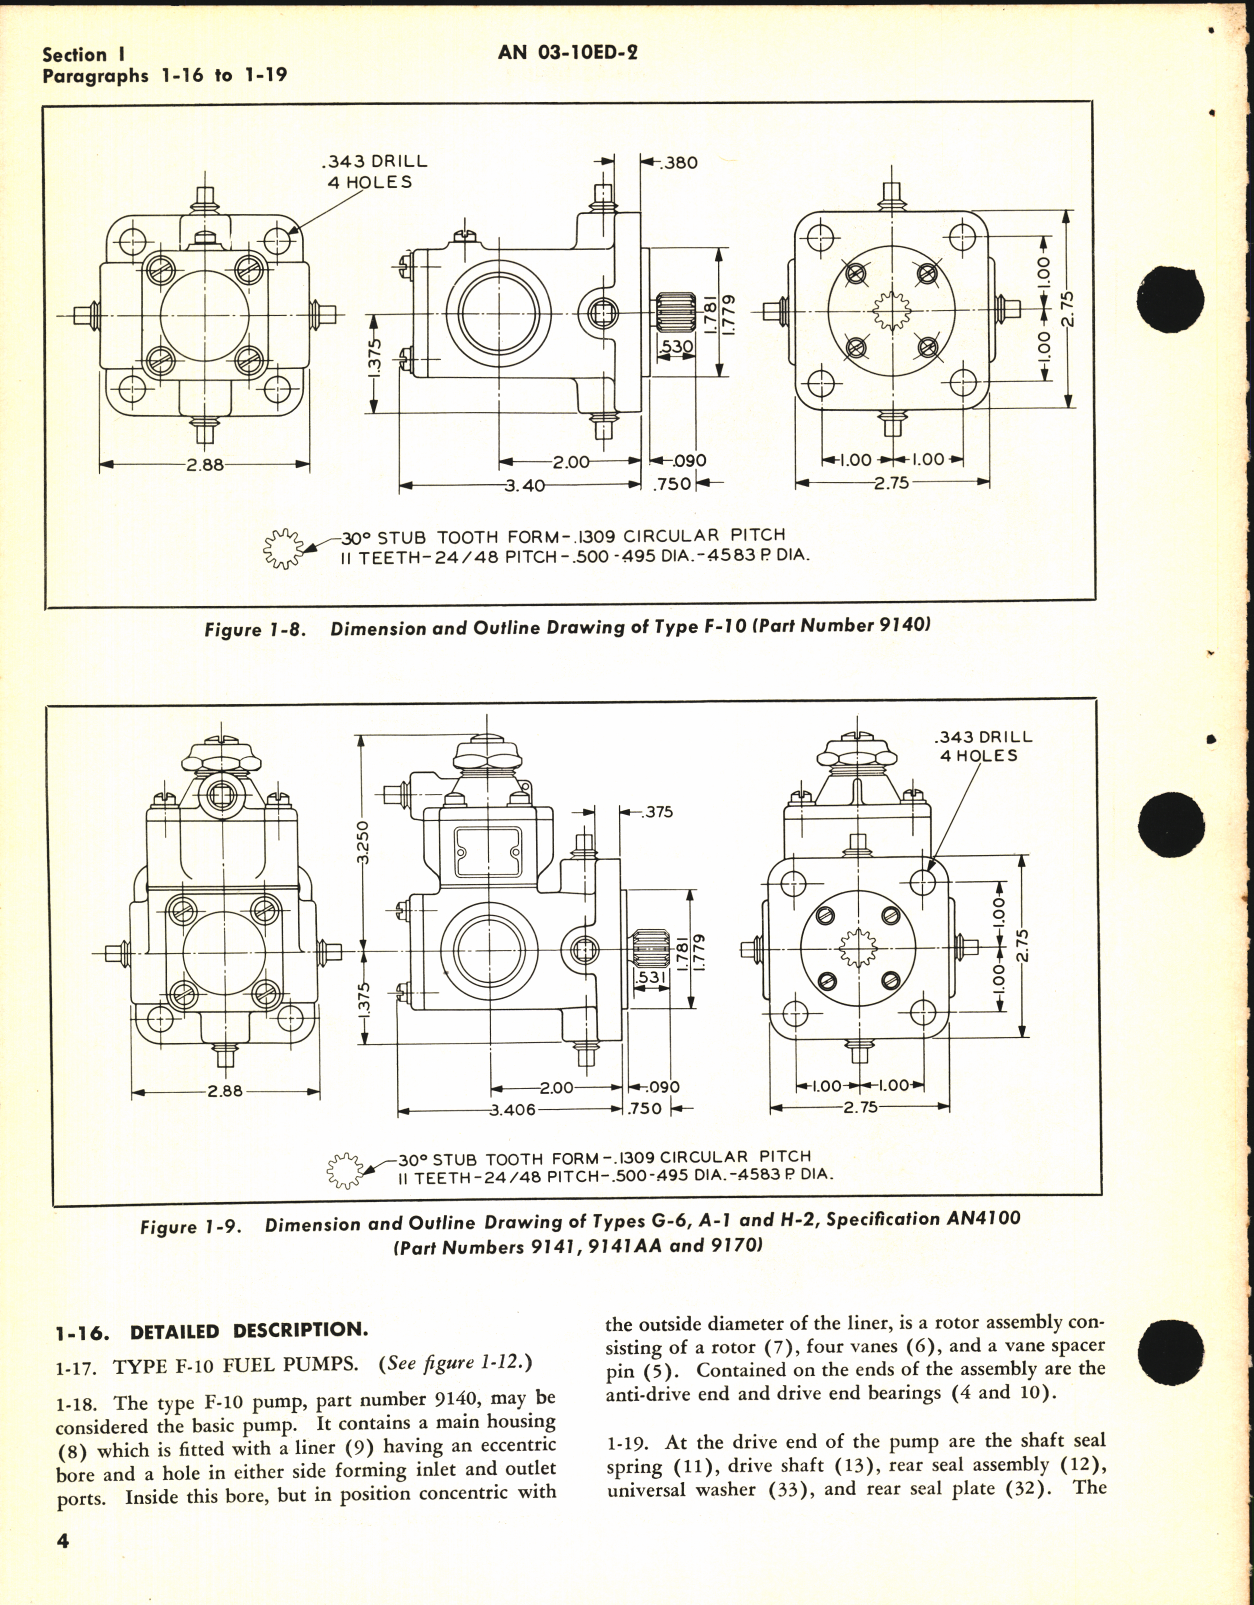 Sample page 8 from AirCorps Library document: Overhaul Instructions for Fuel and Water Pumps